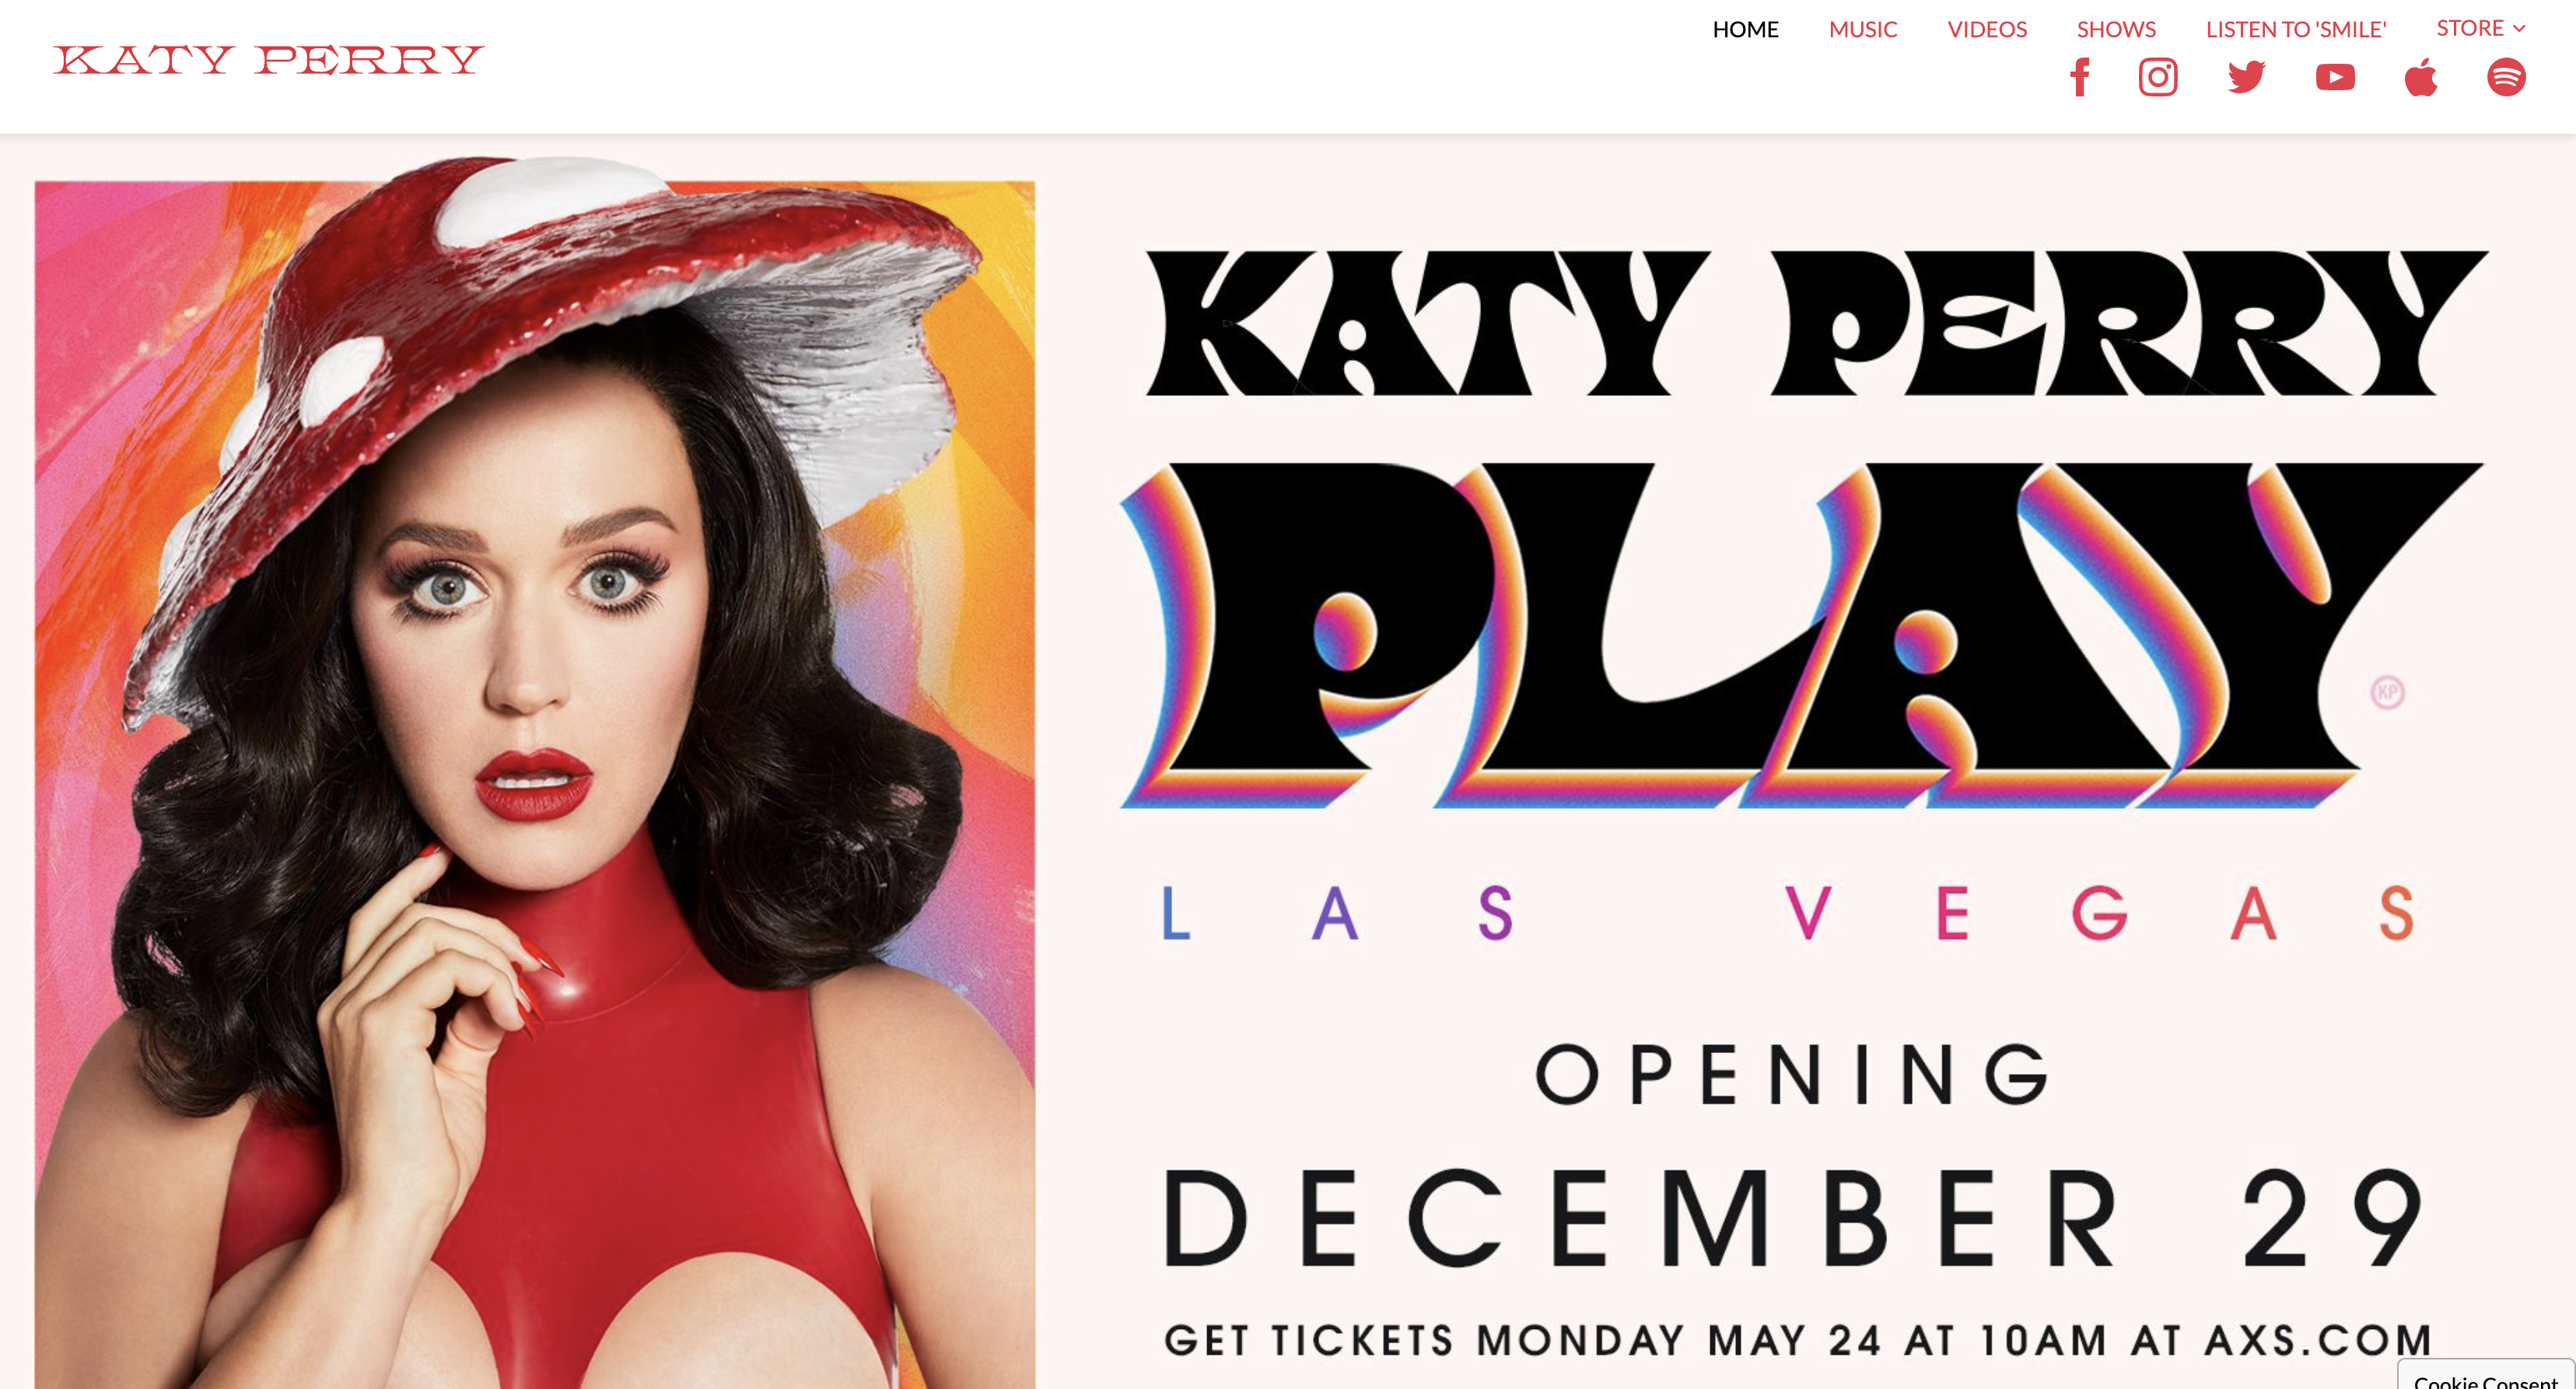 A picture of Katy Perry from her official website